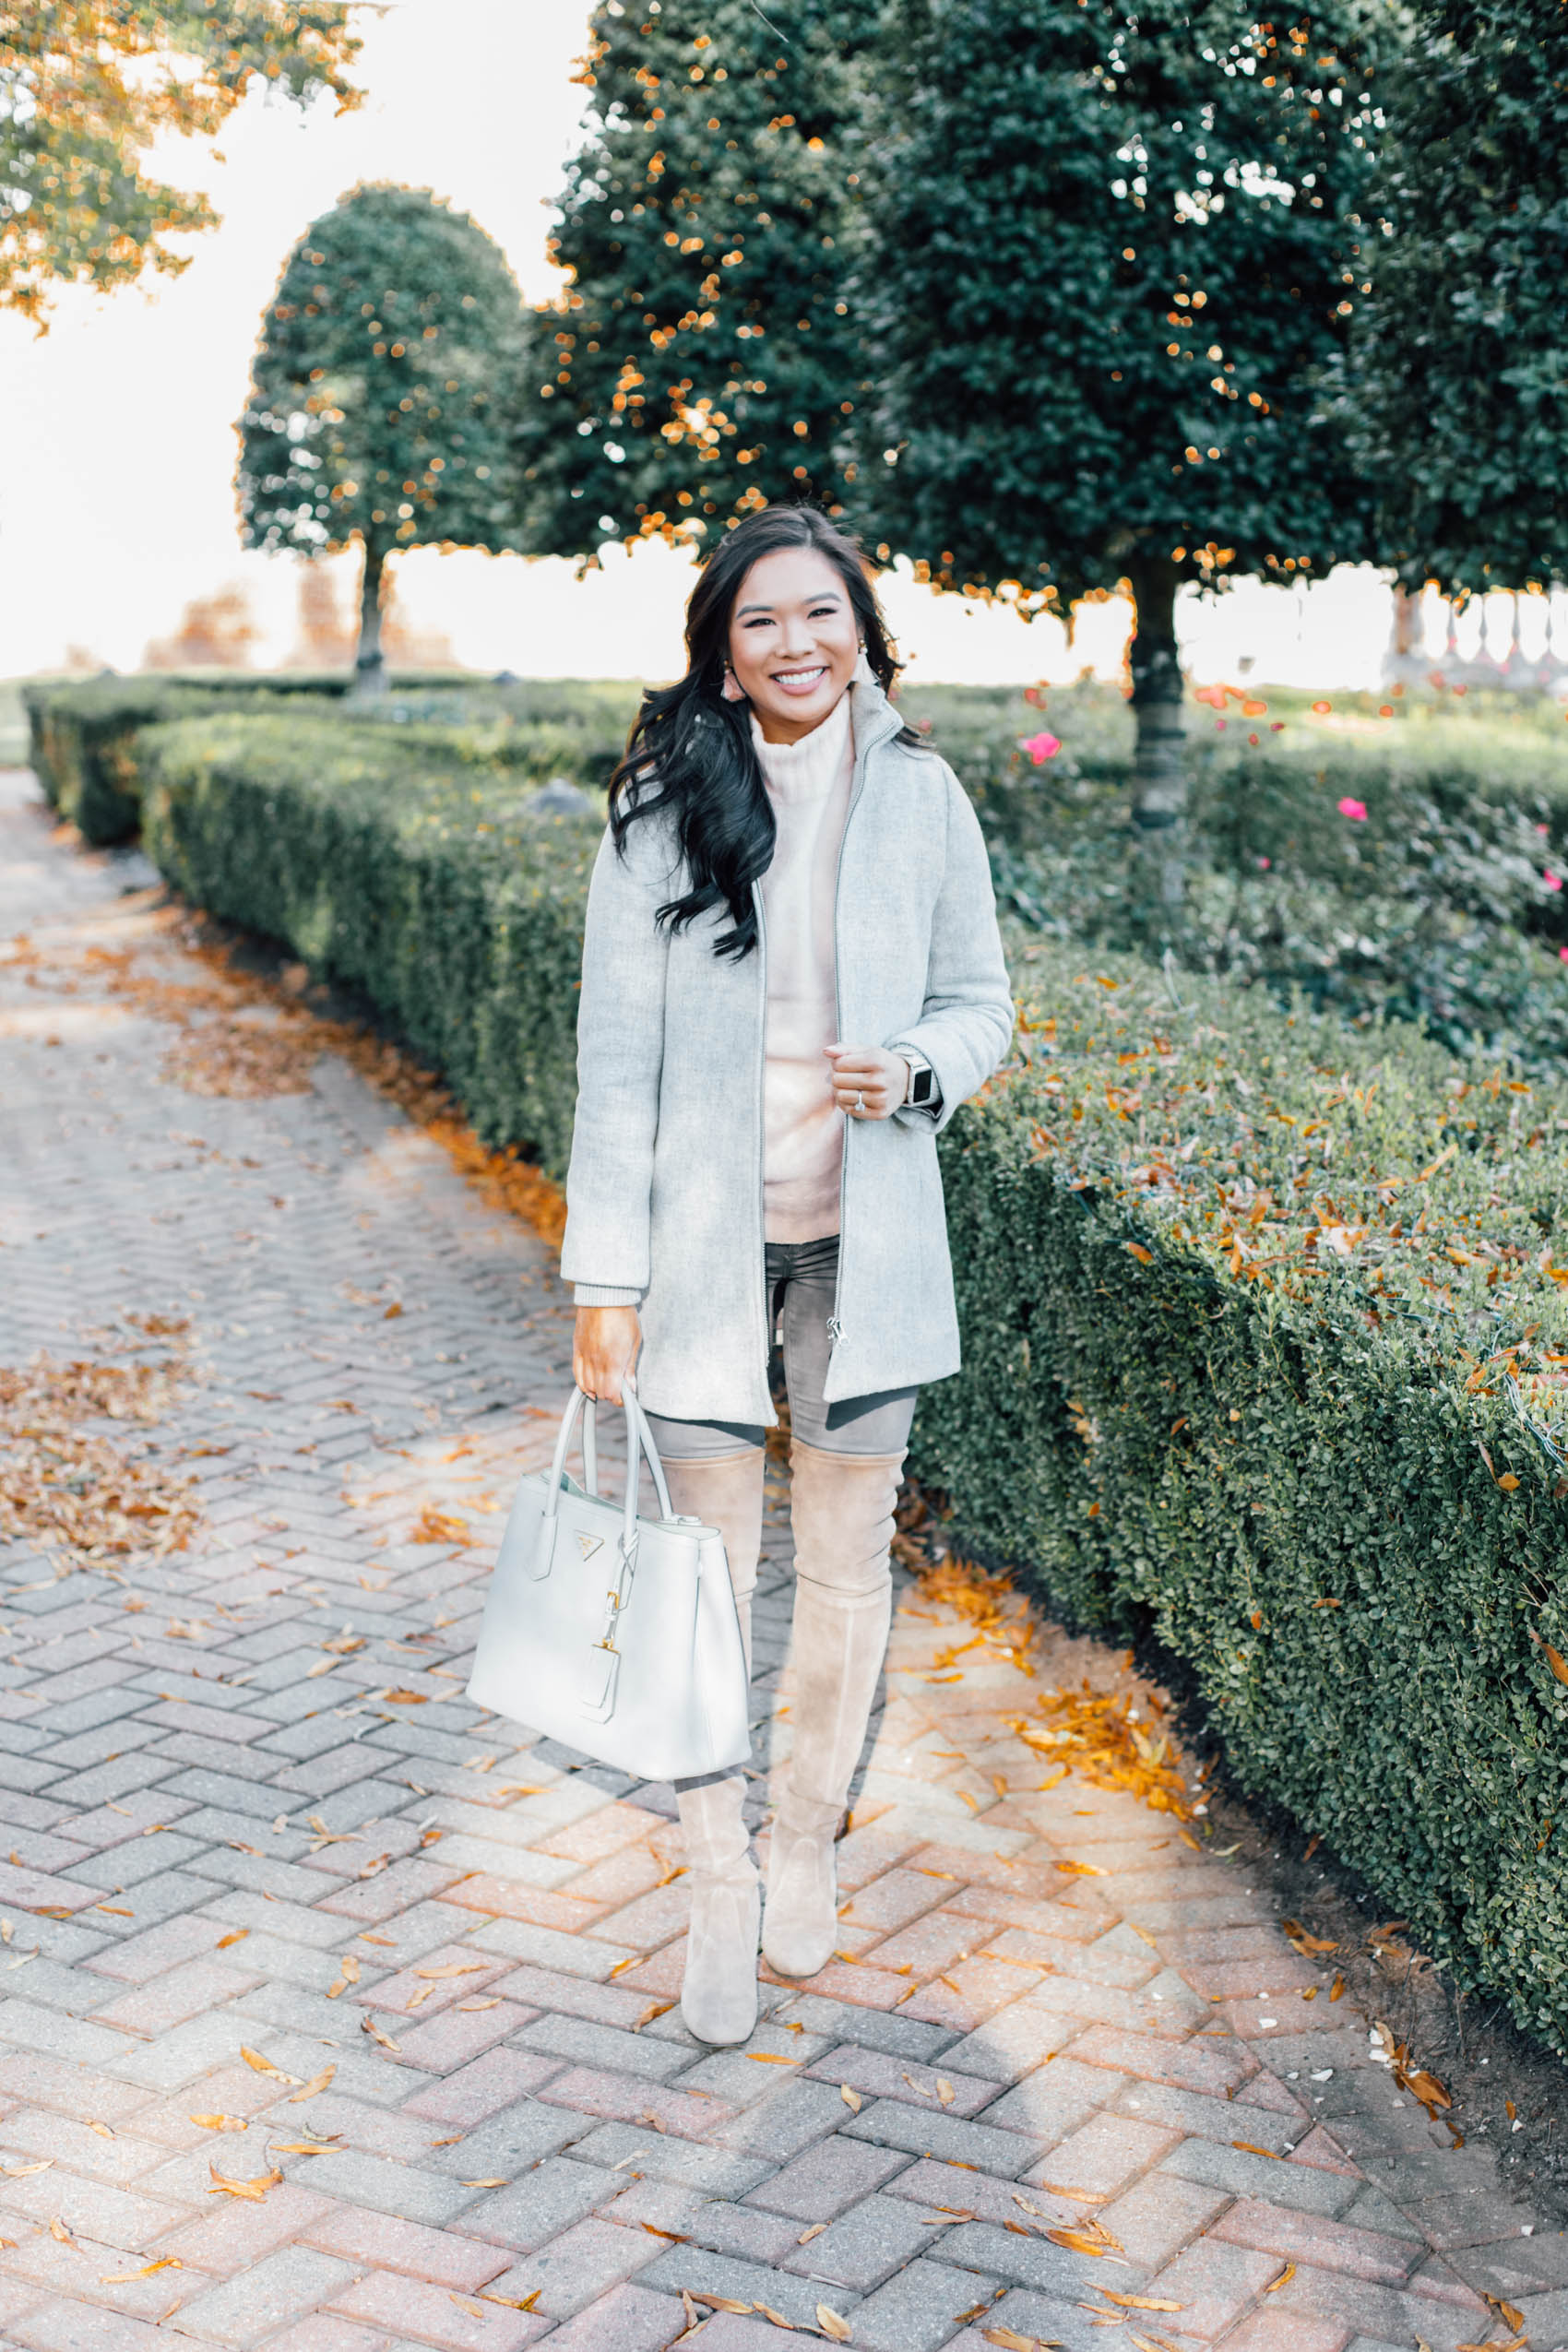 Hoang-Kim wears a wool coat for petite women with over-the-knee boots